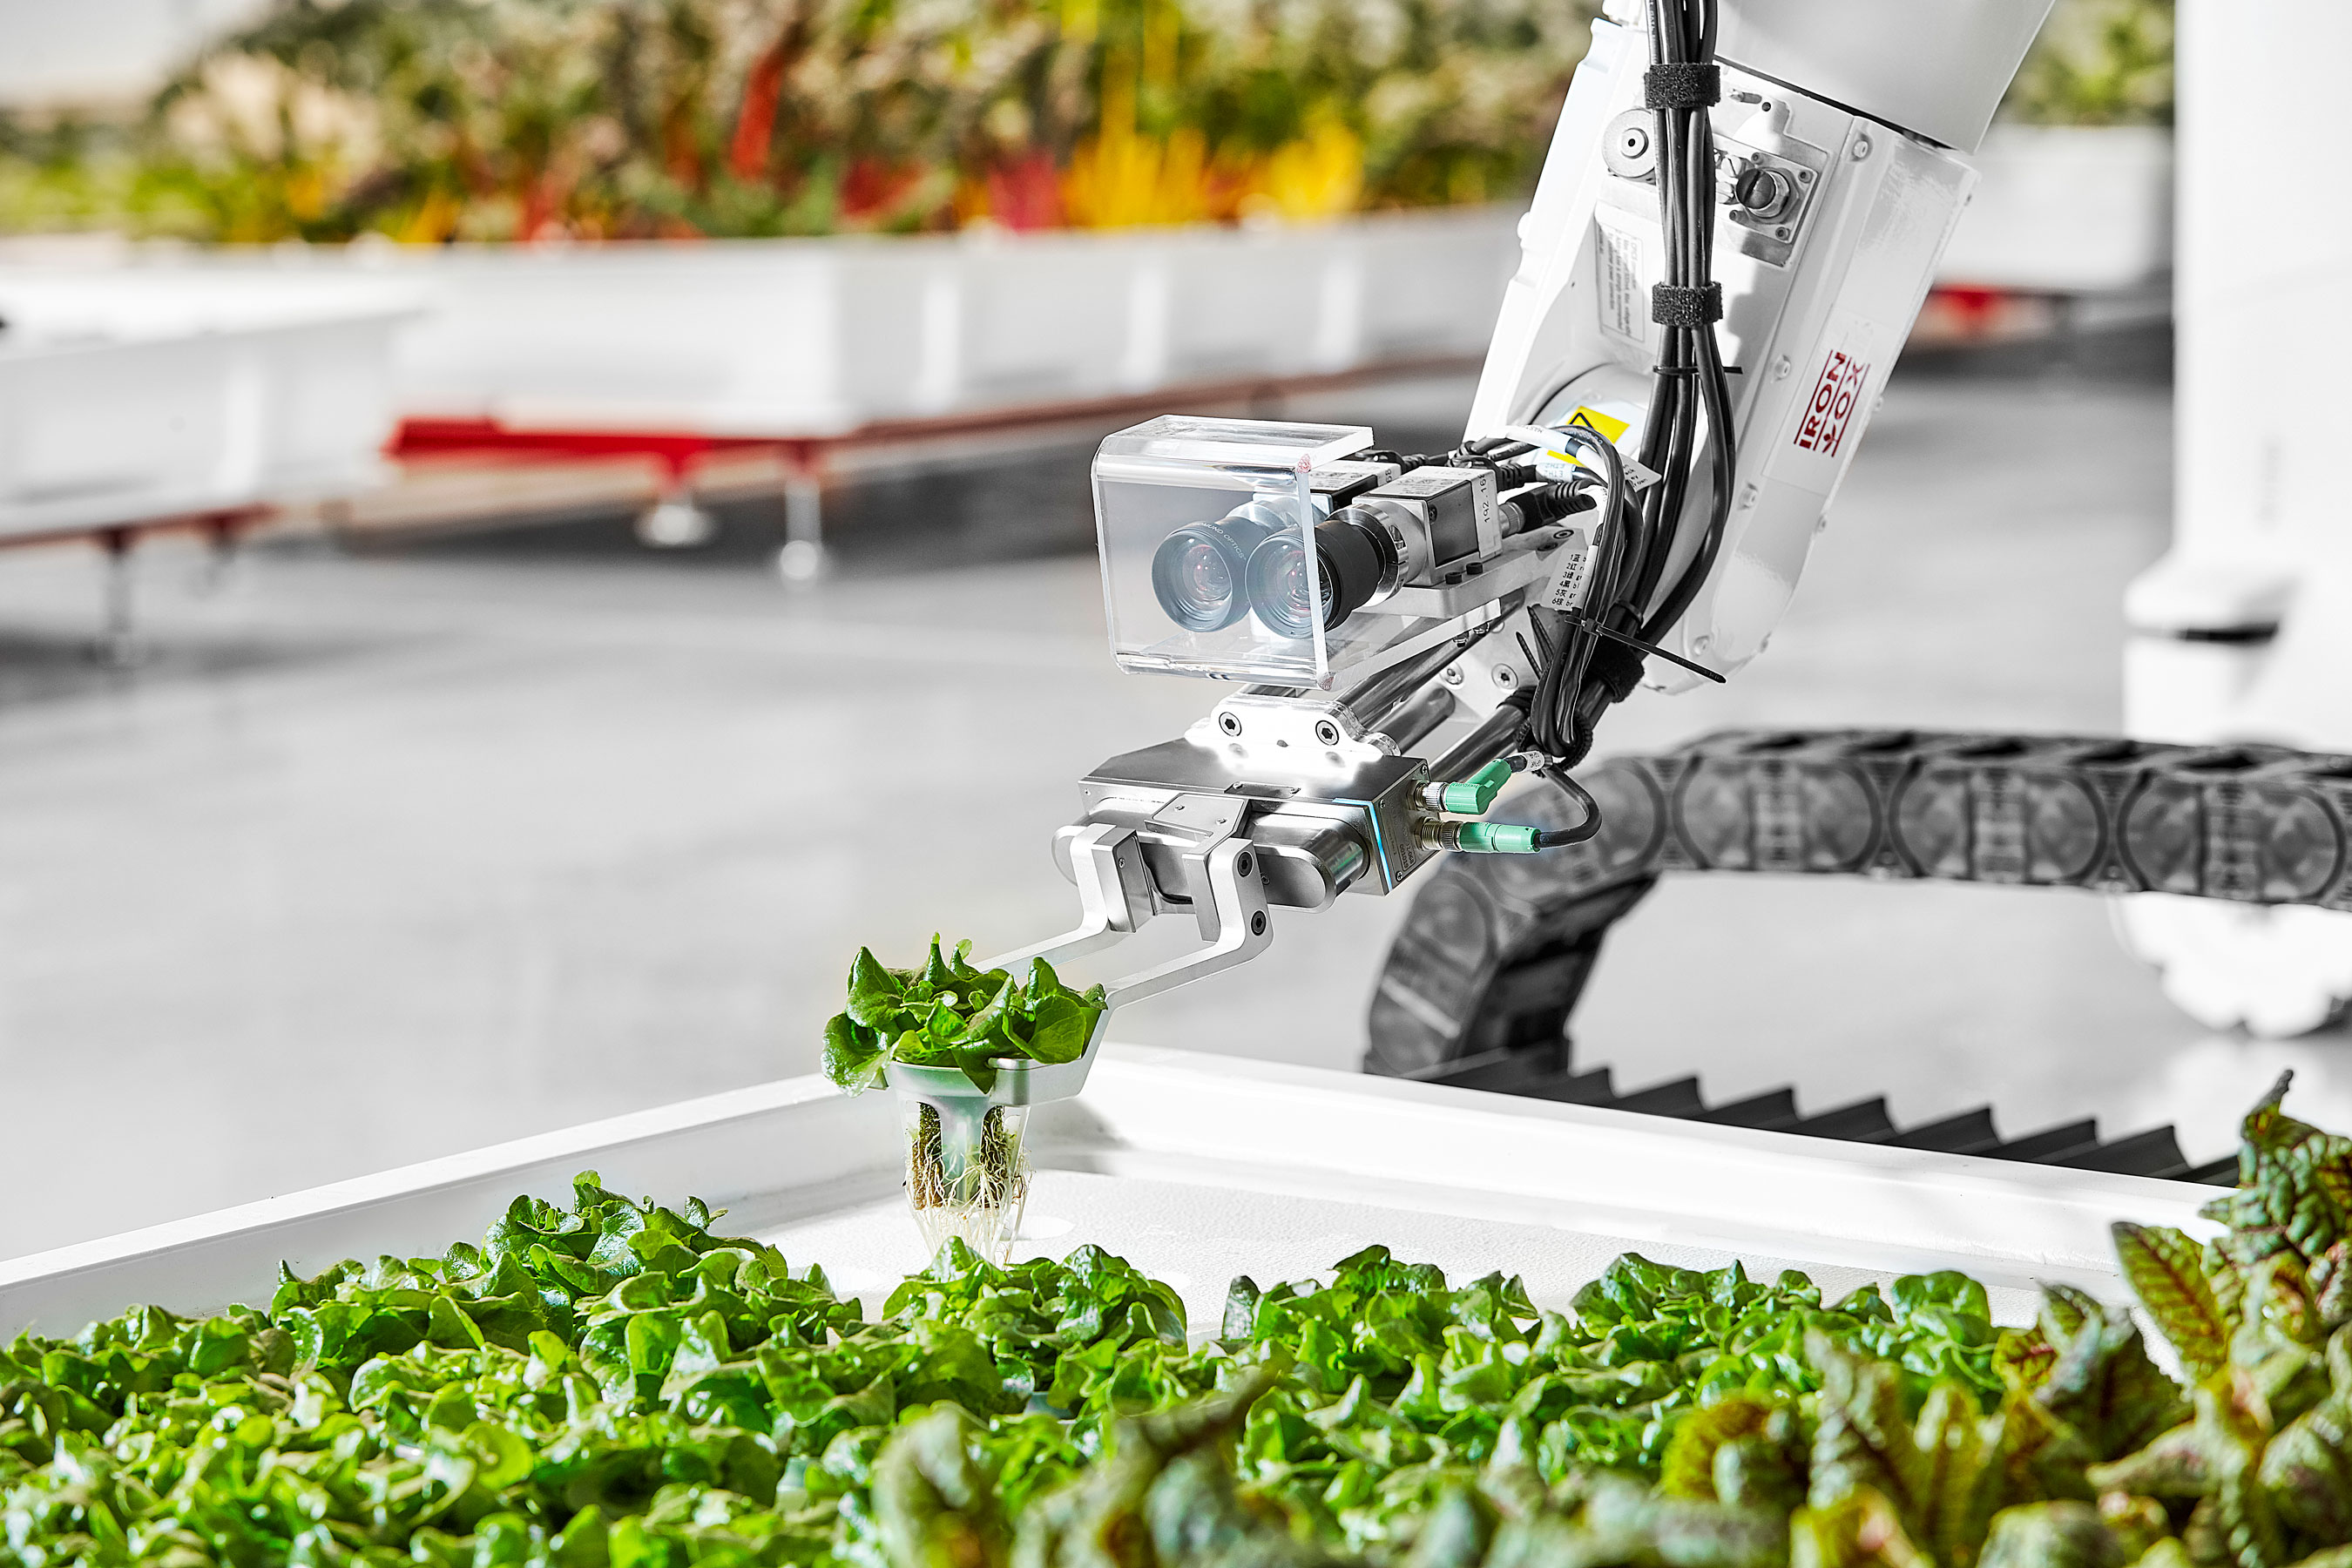 New autonomous farm to produce food without human workers MIT Technology Review